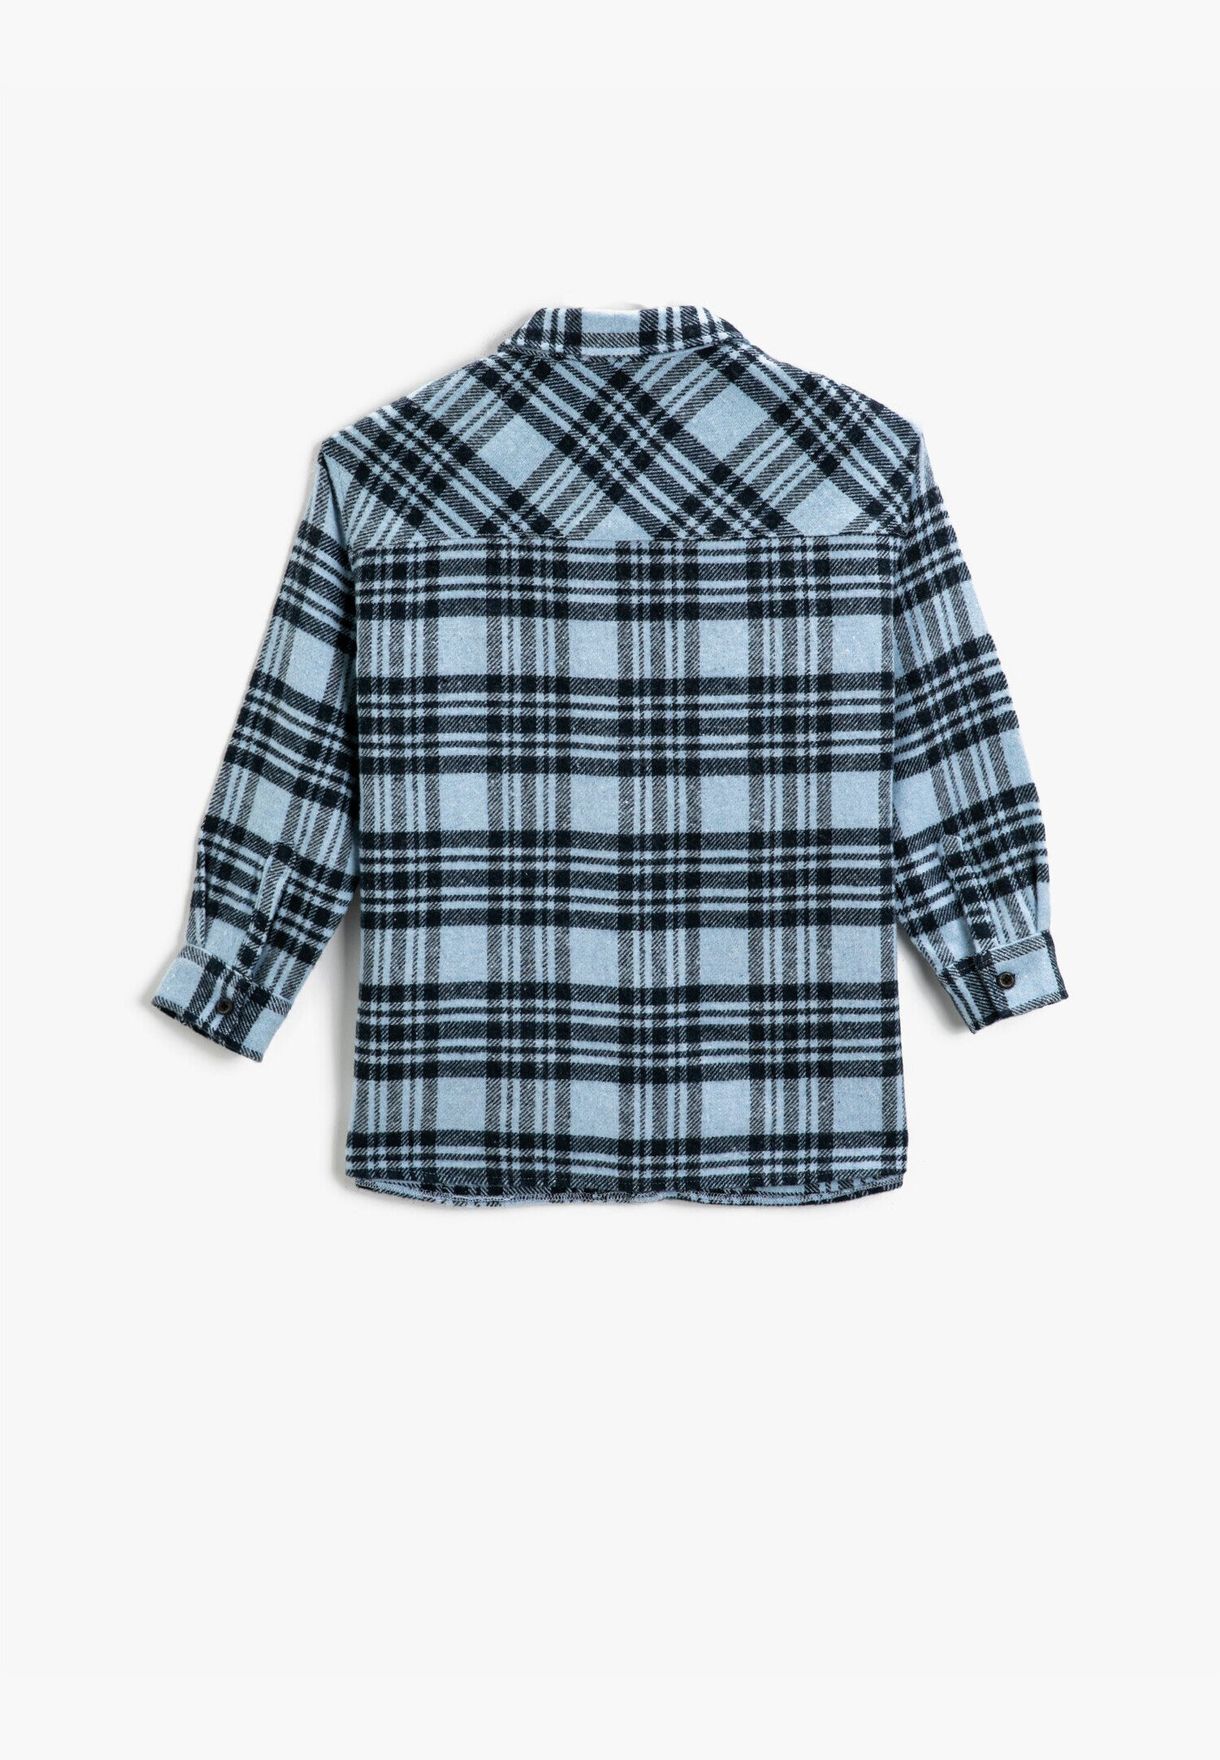 Checked Flannel Shirt Long Sleeve Double Pocket